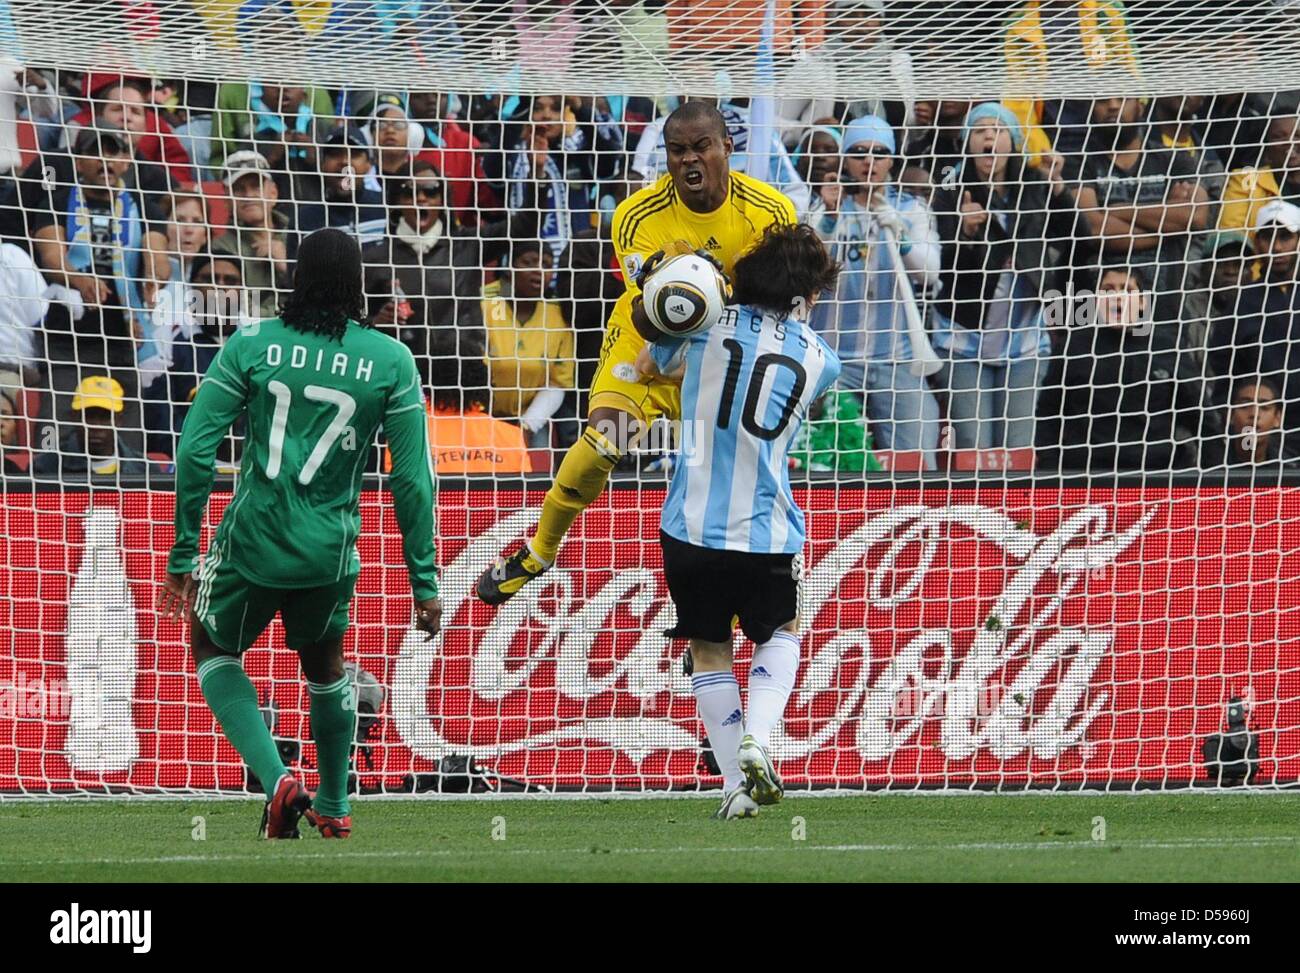 Argentina's Lionel Messi (R) clashes with Nigeria's goalkeeper Vincent Enyeama during the 2010 FIFA World Cup group B match between Argentina and Nigeria at Ellis Park stadium in Johannesburg, South Africa 12 June 2010. Argentina won 1-0. Photo: Achim Scheidemann - Please refer to http://dpaq.de/FIFA-WM2010-TC Stock Photo